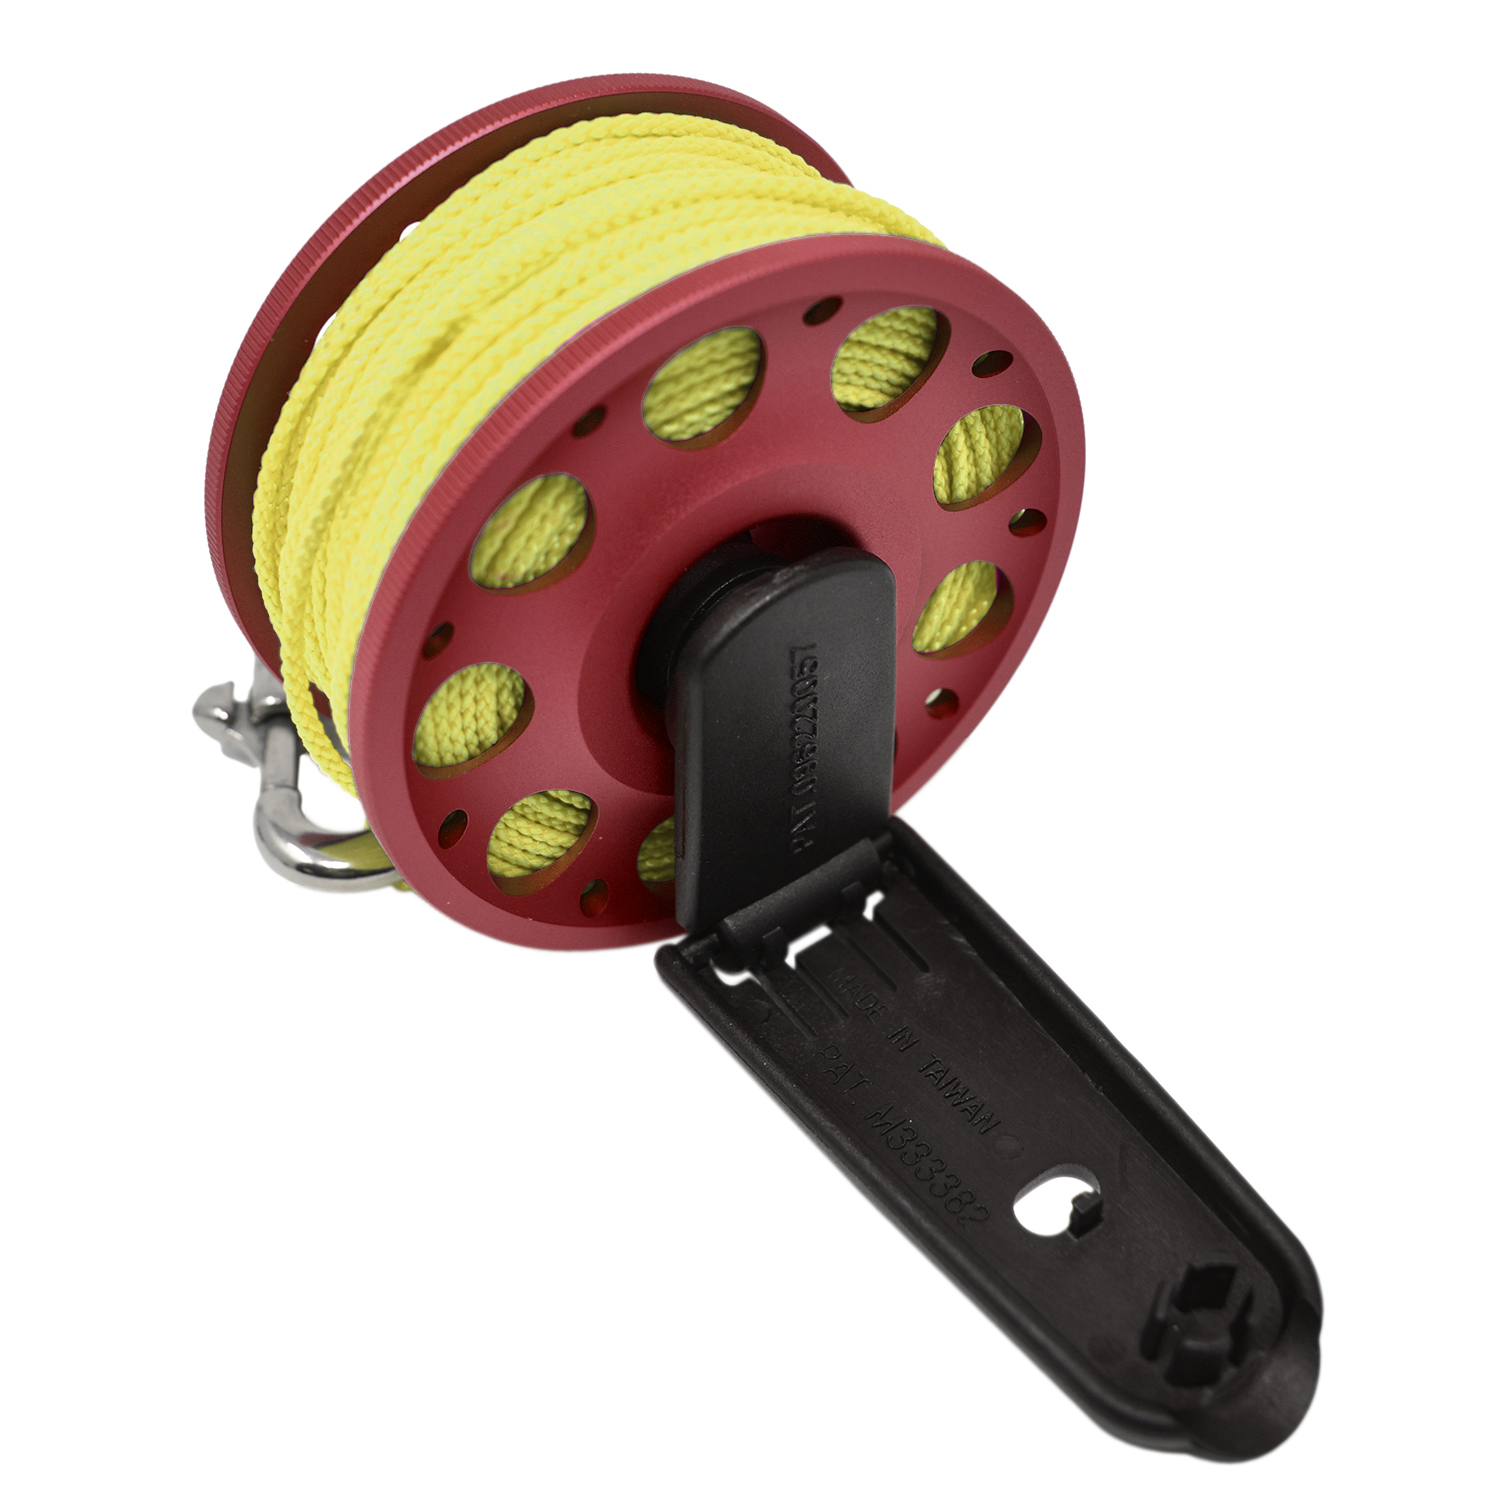 Aluminum Finger Spool 100ft Dive Reel w/ Retractable Holder, Red/Yellow - image 1 of 4